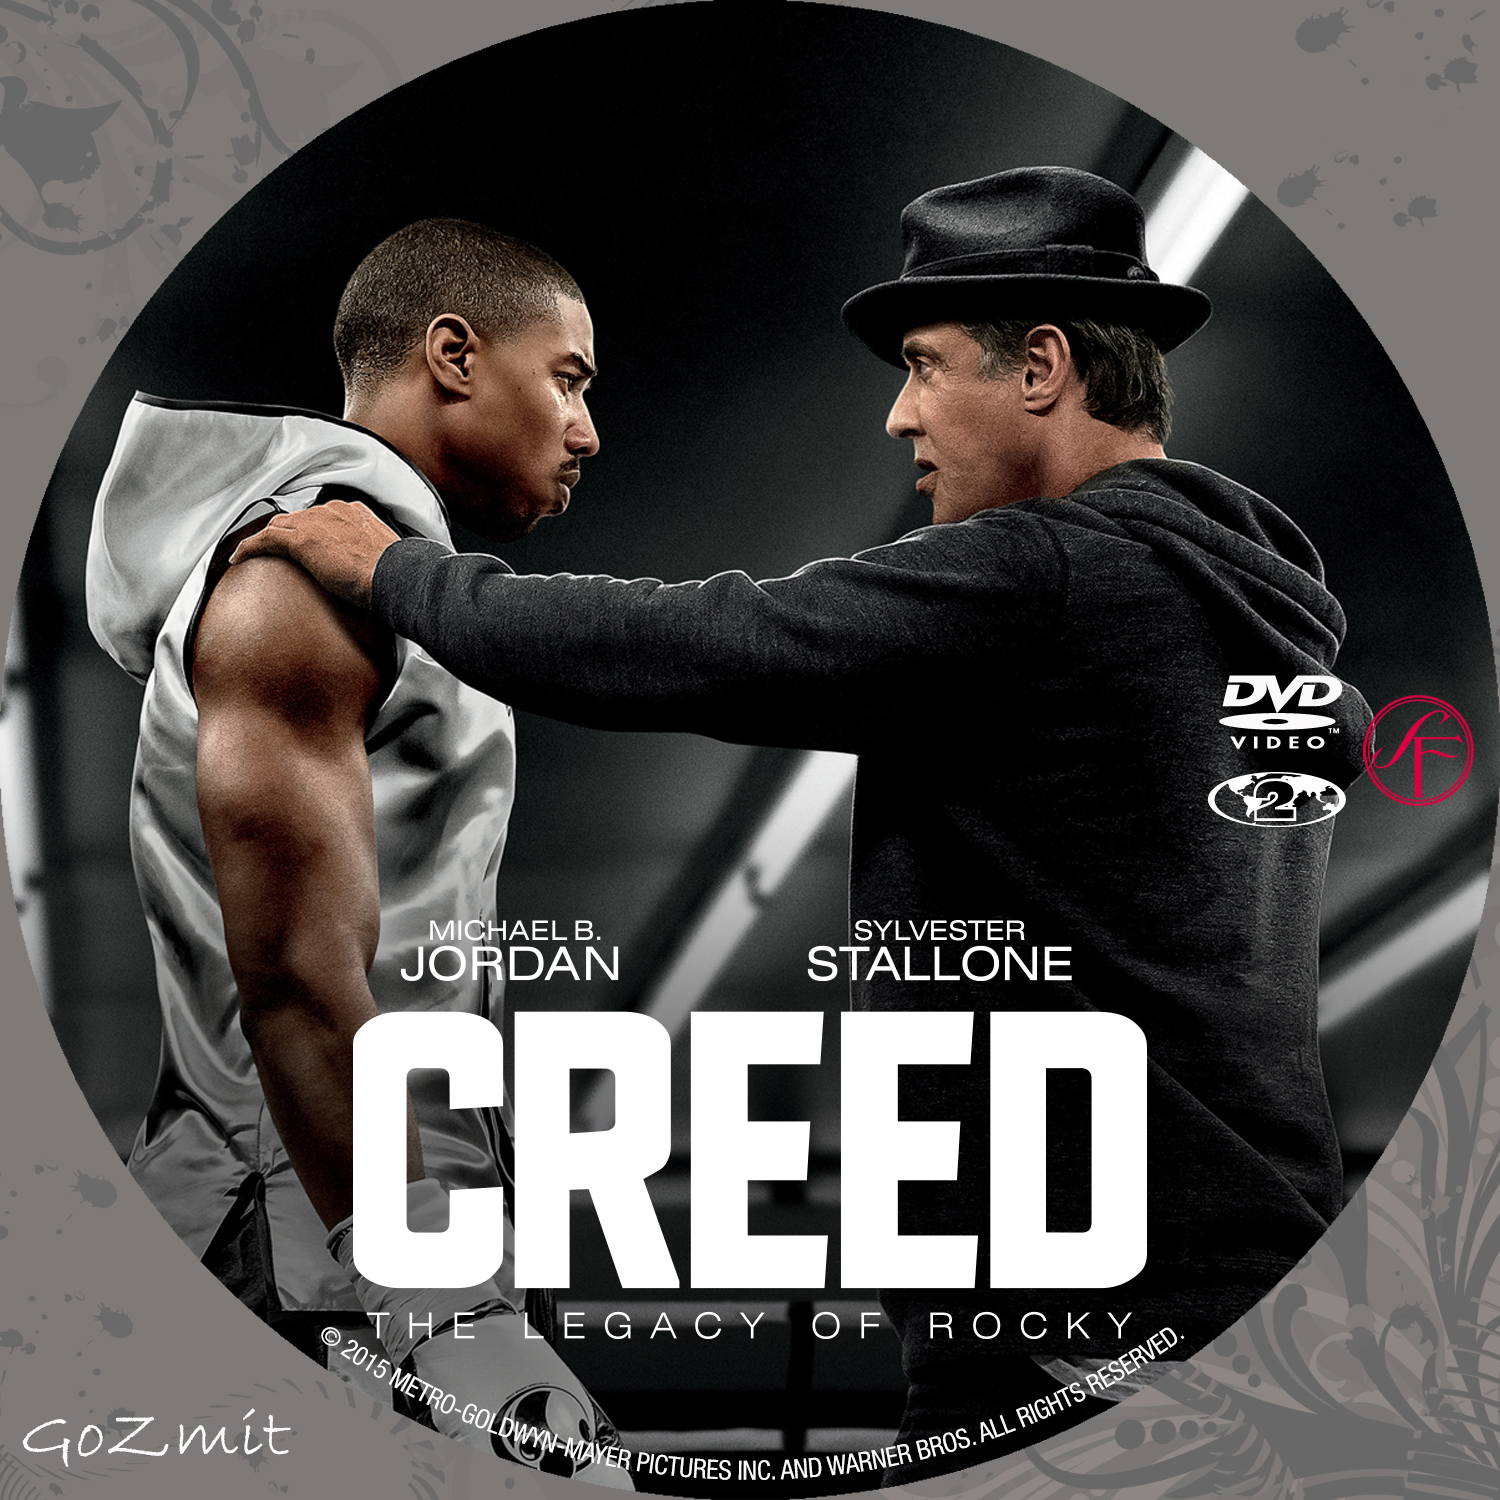 bisonte Cálculo Interconectar COVERS.BOX.SK ::: Creed (2015) - high quality DVD / Blueray / Movie